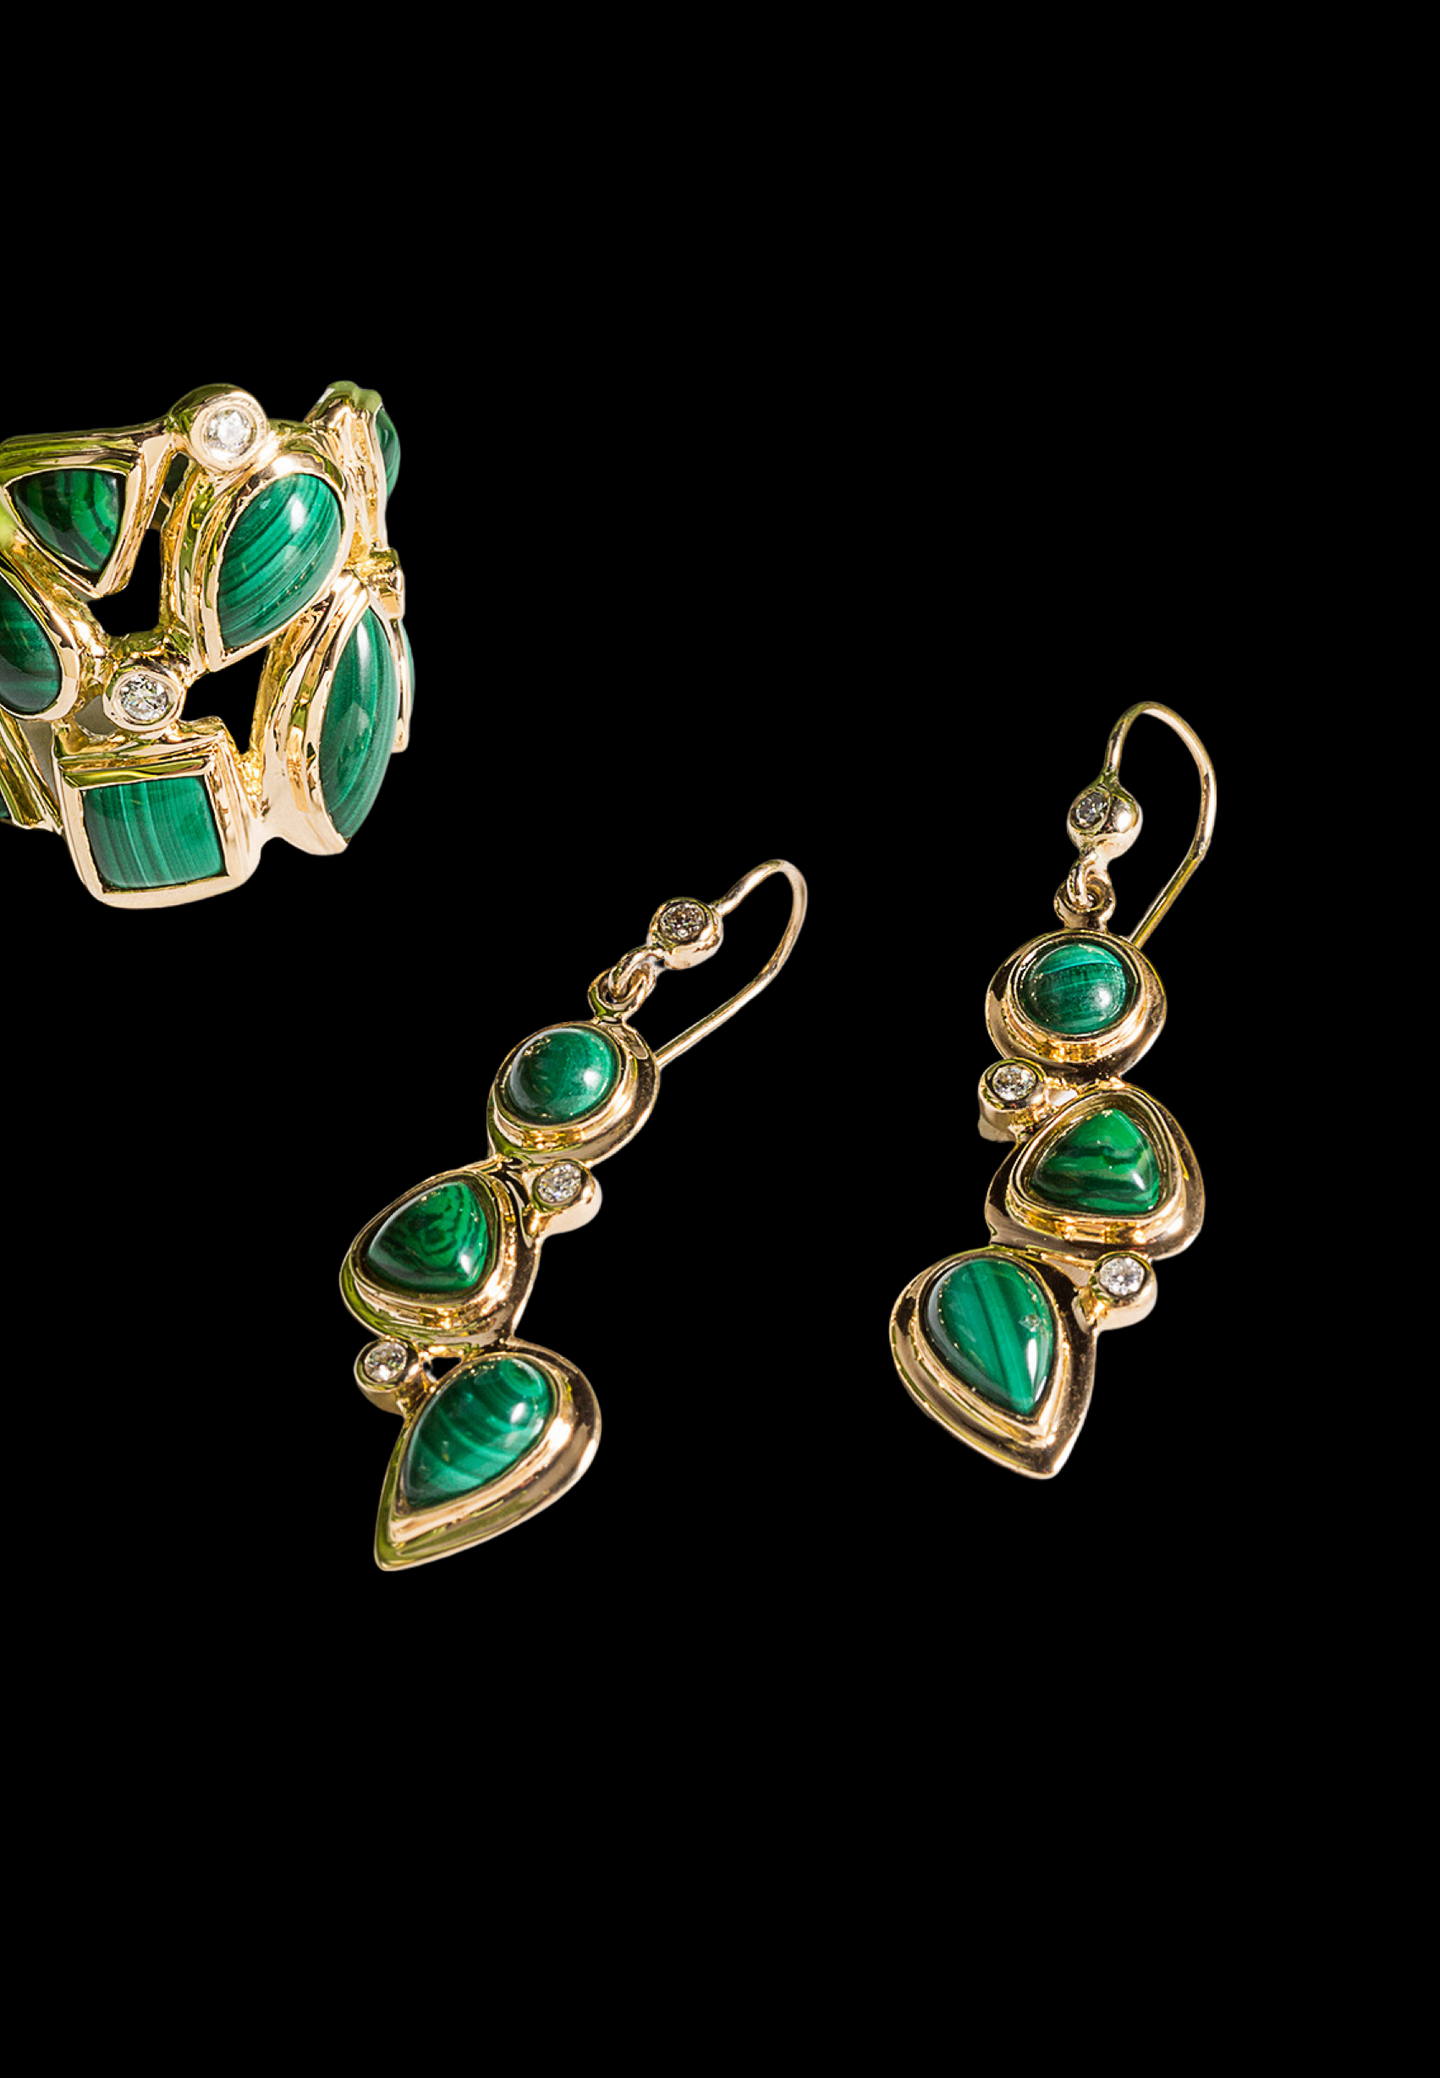 Mosaic Earrings and Statement ring in 18K Yellow Gold with Malachite and Diamonds - Darby Scott